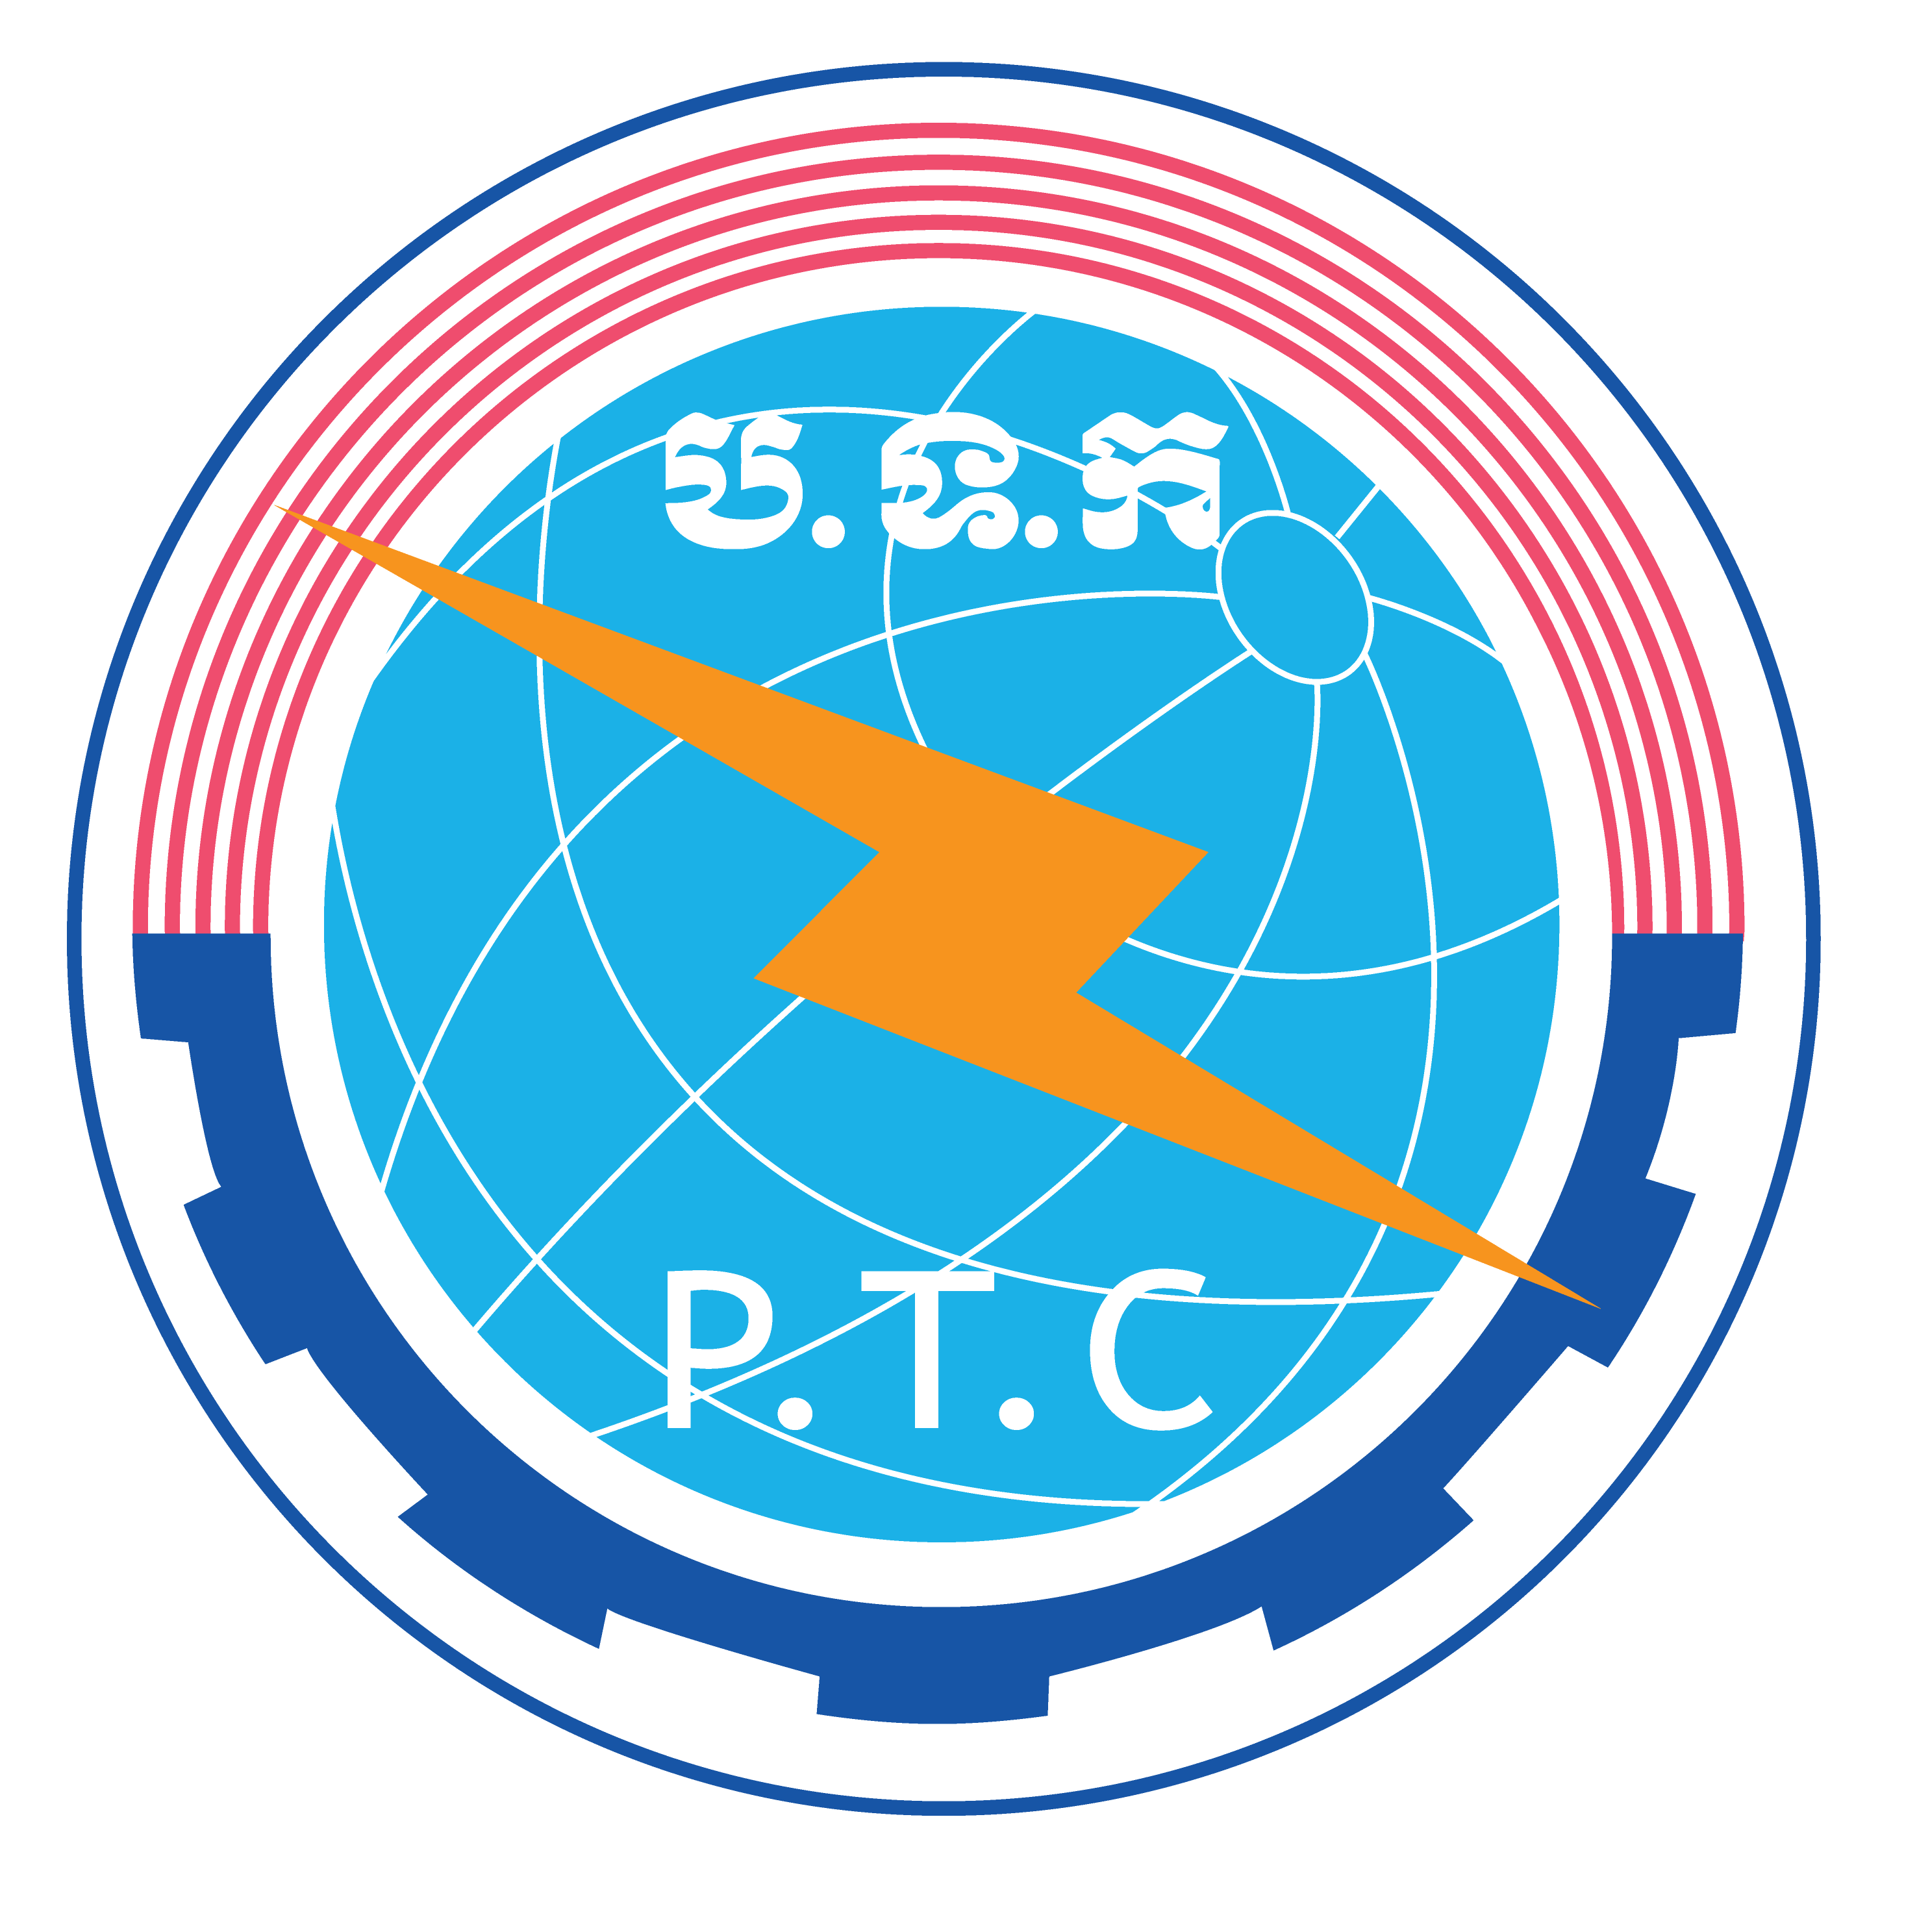 Ministry of Post and Telecommunications of Cambodia